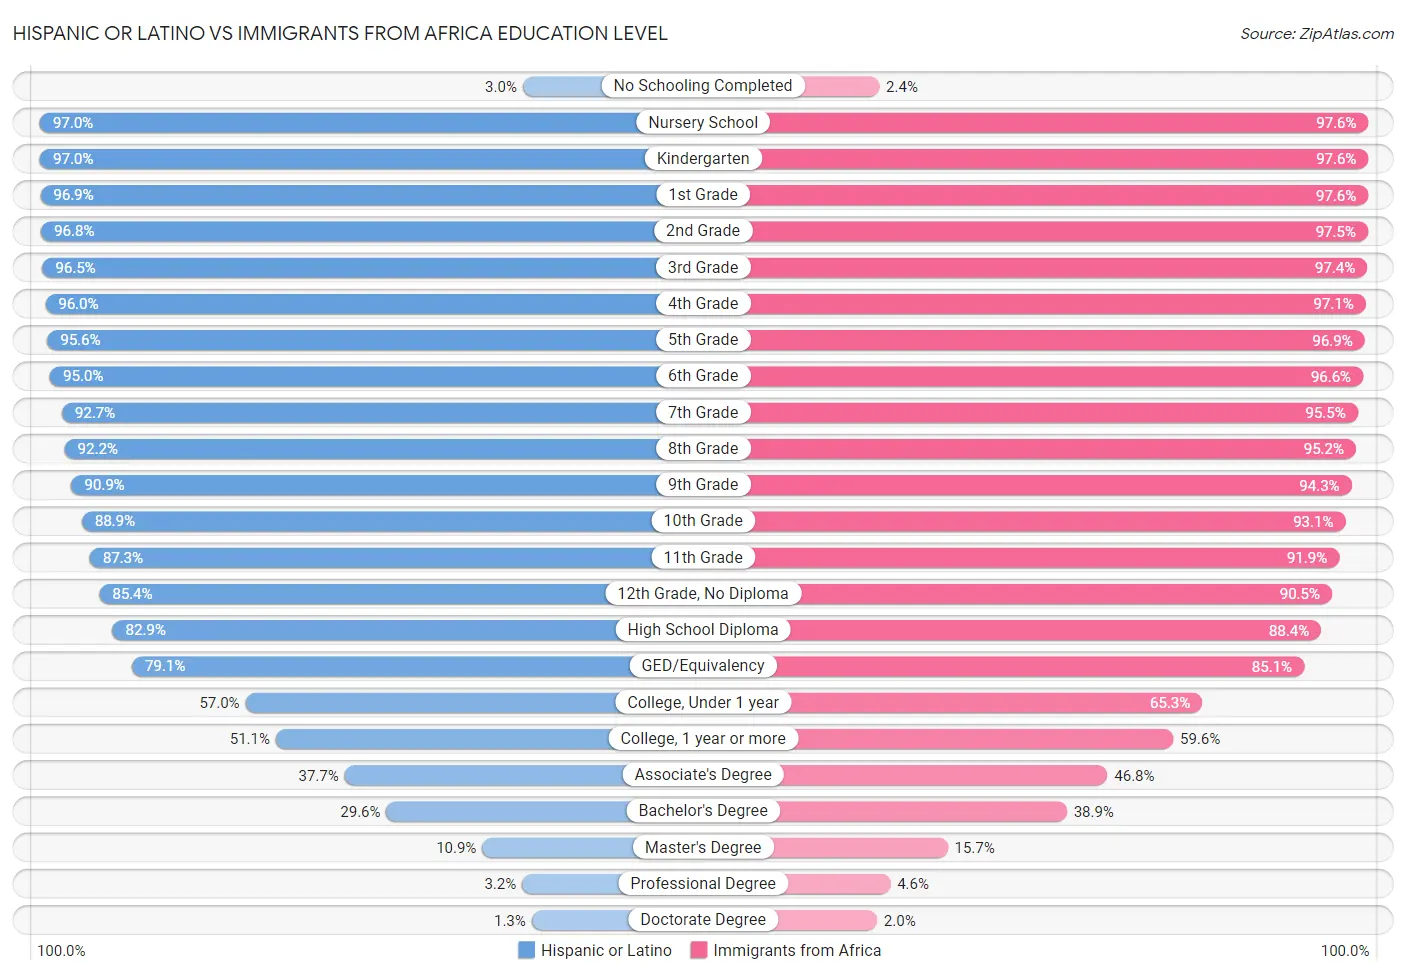 Hispanic or Latino vs Immigrants from Africa Education Level